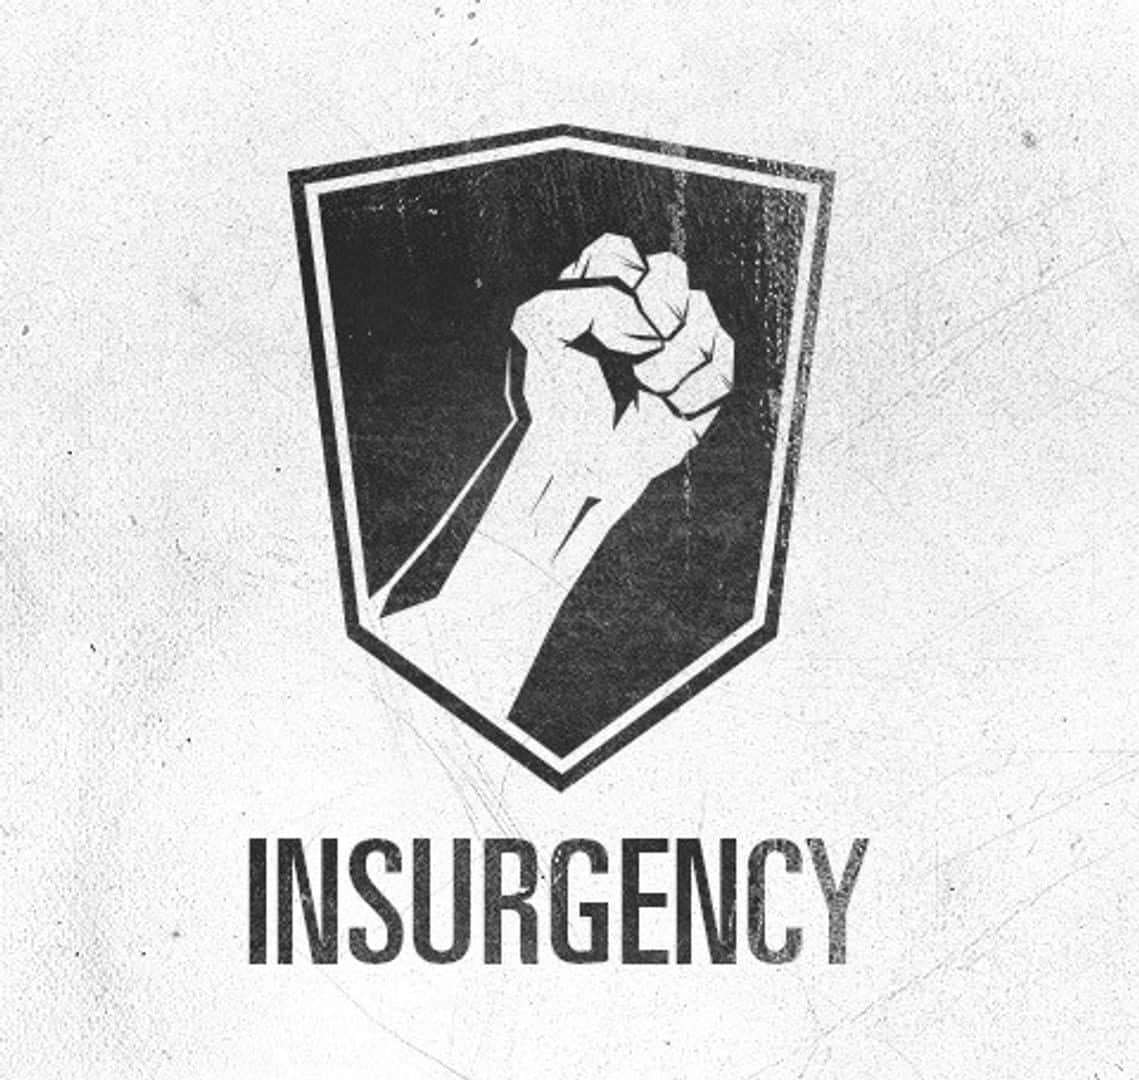 sourcemod plugins for insurgency